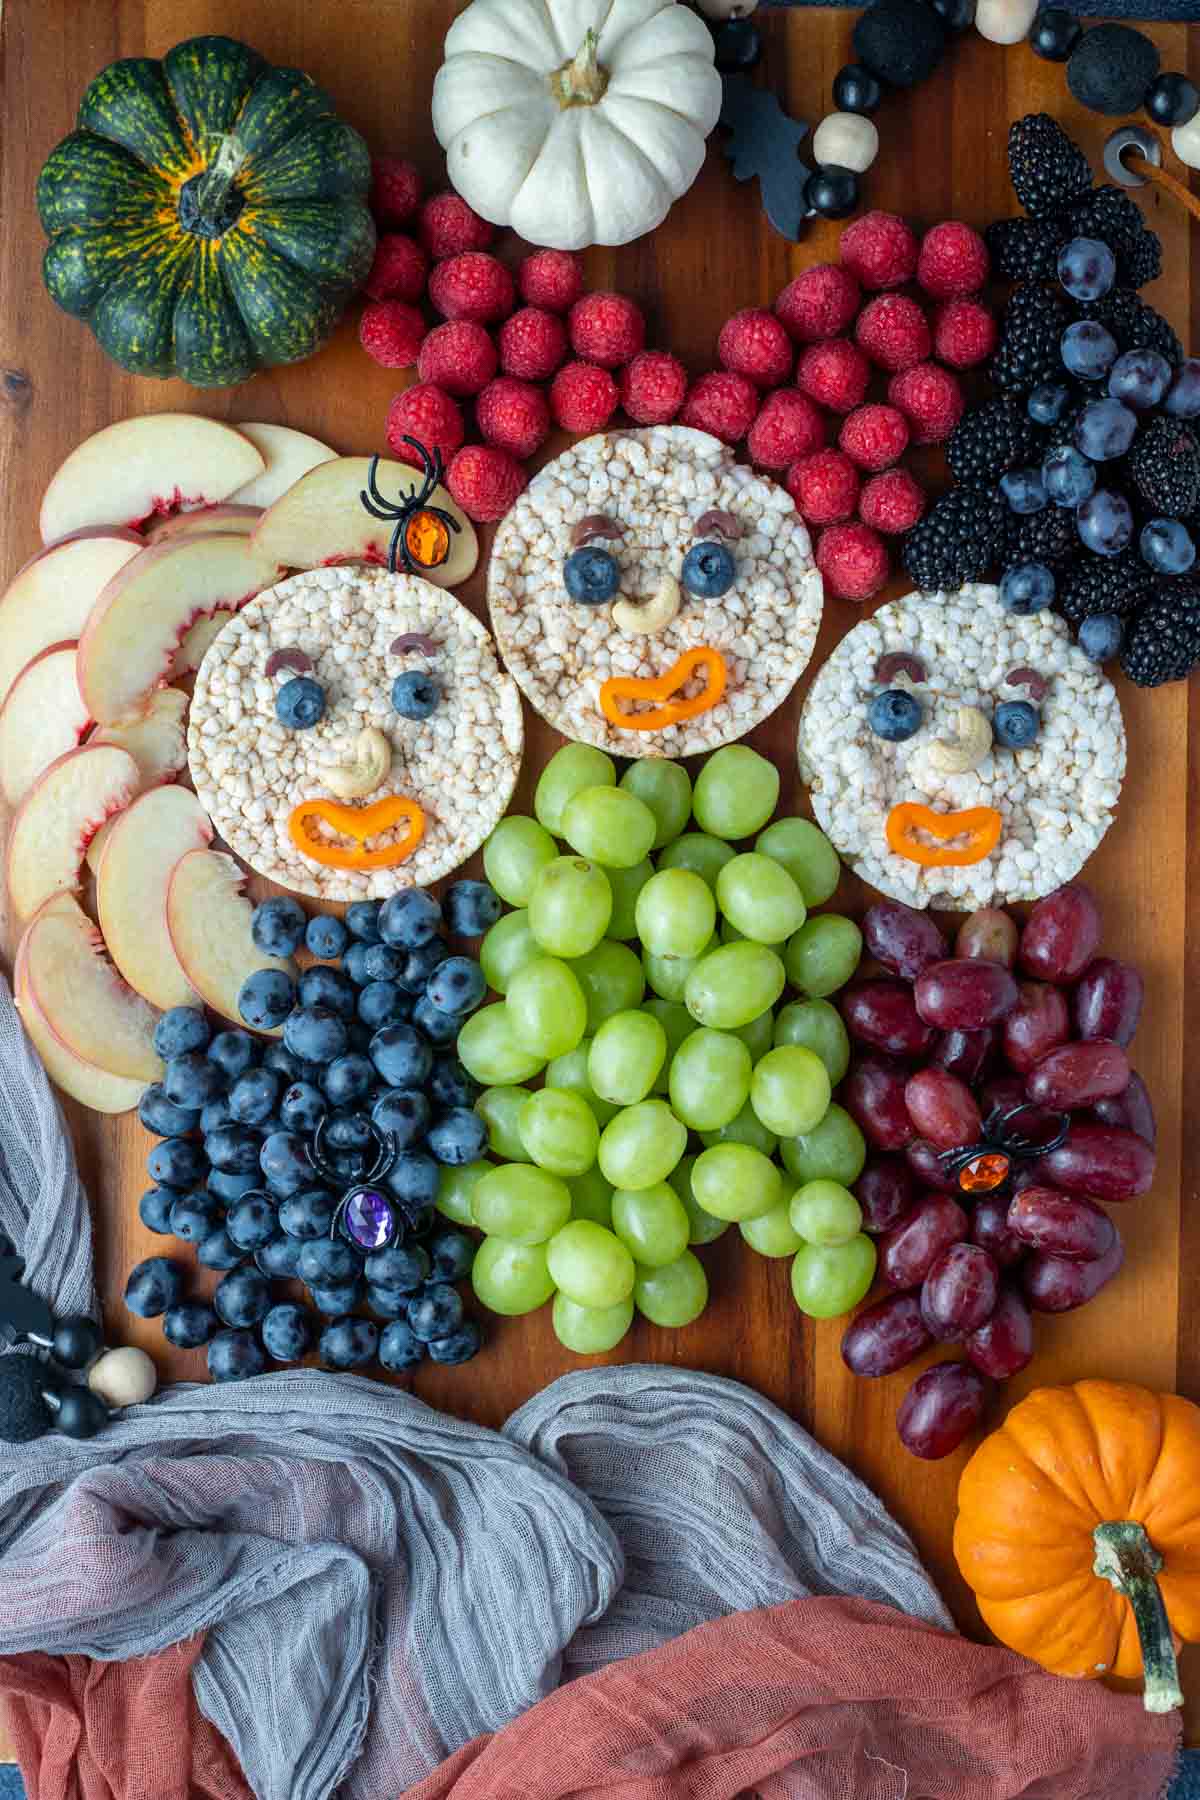 Hocus Pocus snack board made with fruit and rice cakes.
